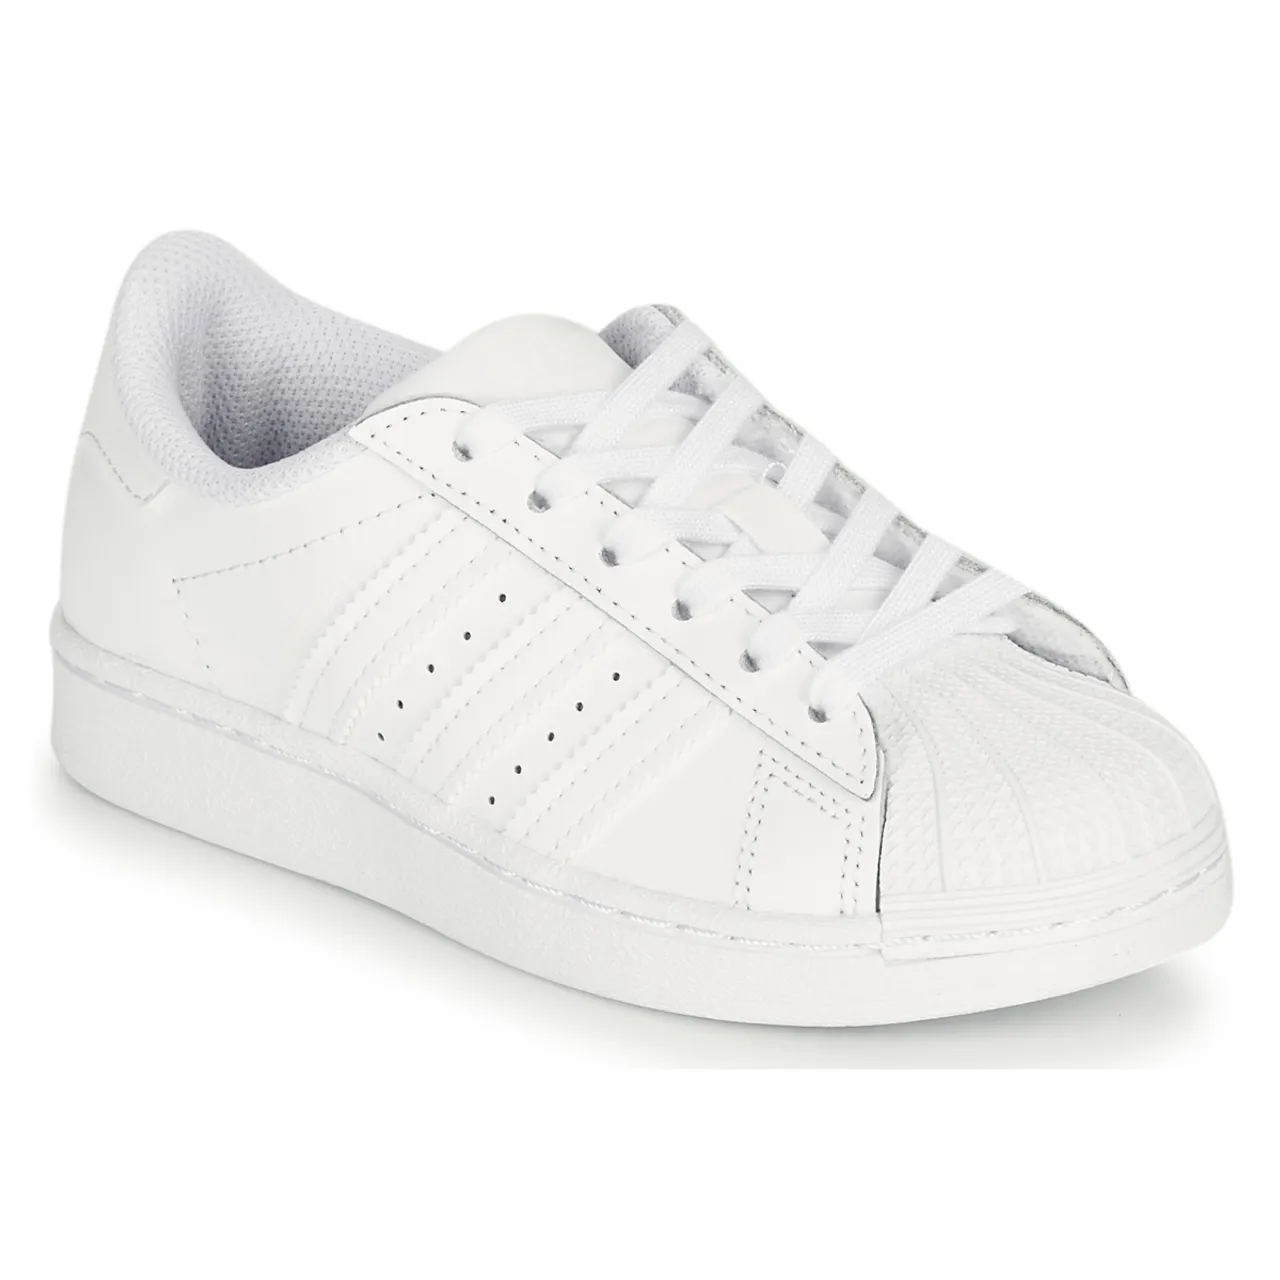 adidas  SUPERSTAR C  boys's Children's Shoes (Trainers) in White